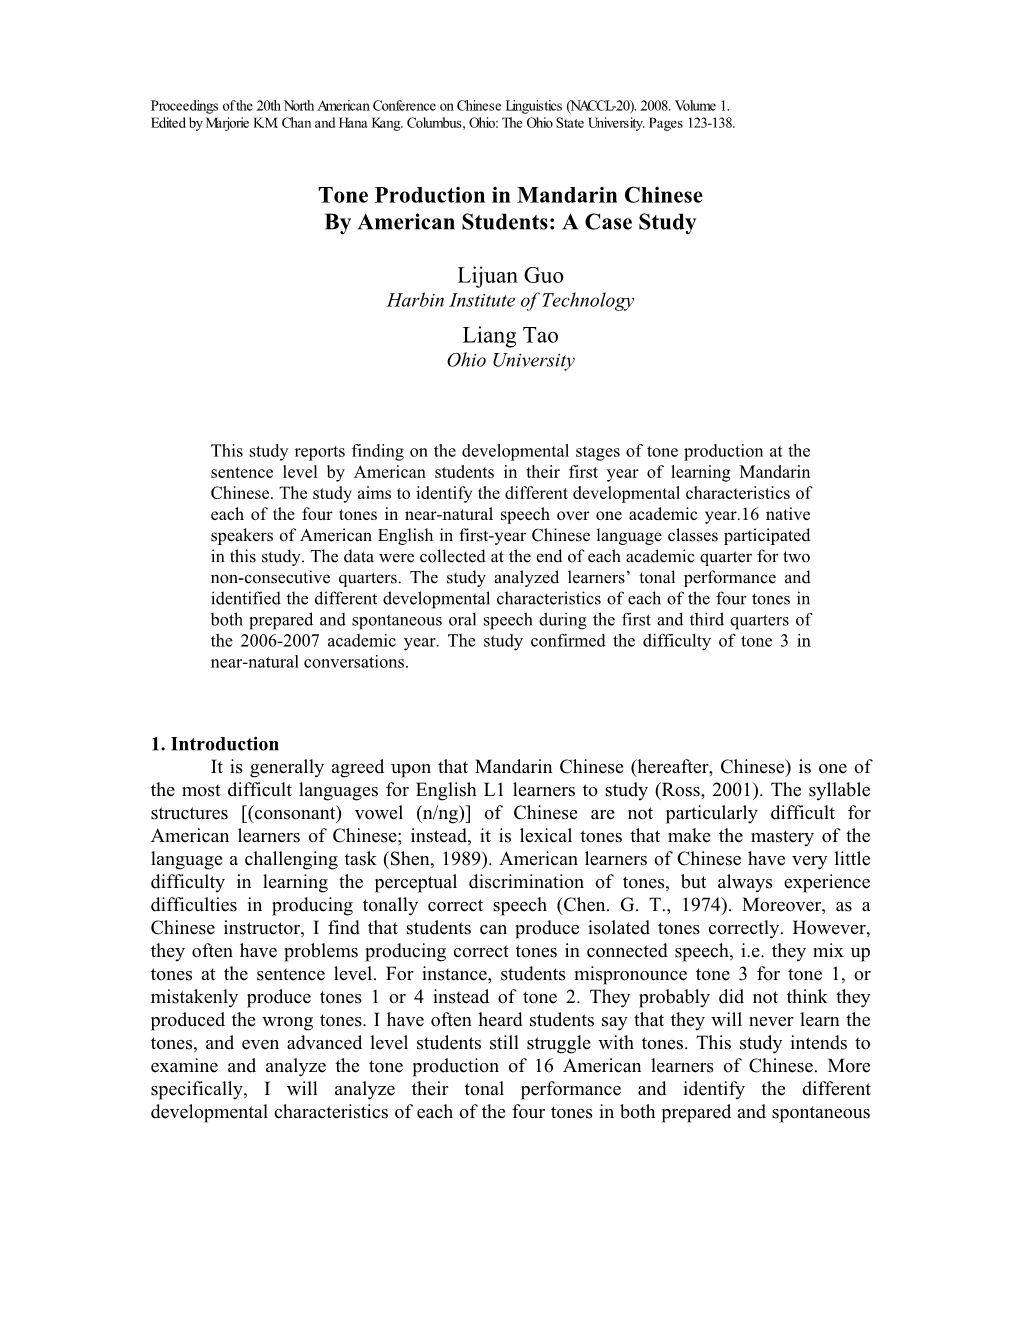 Tone Production in Mandarin Chinese by American Students: a Case Study